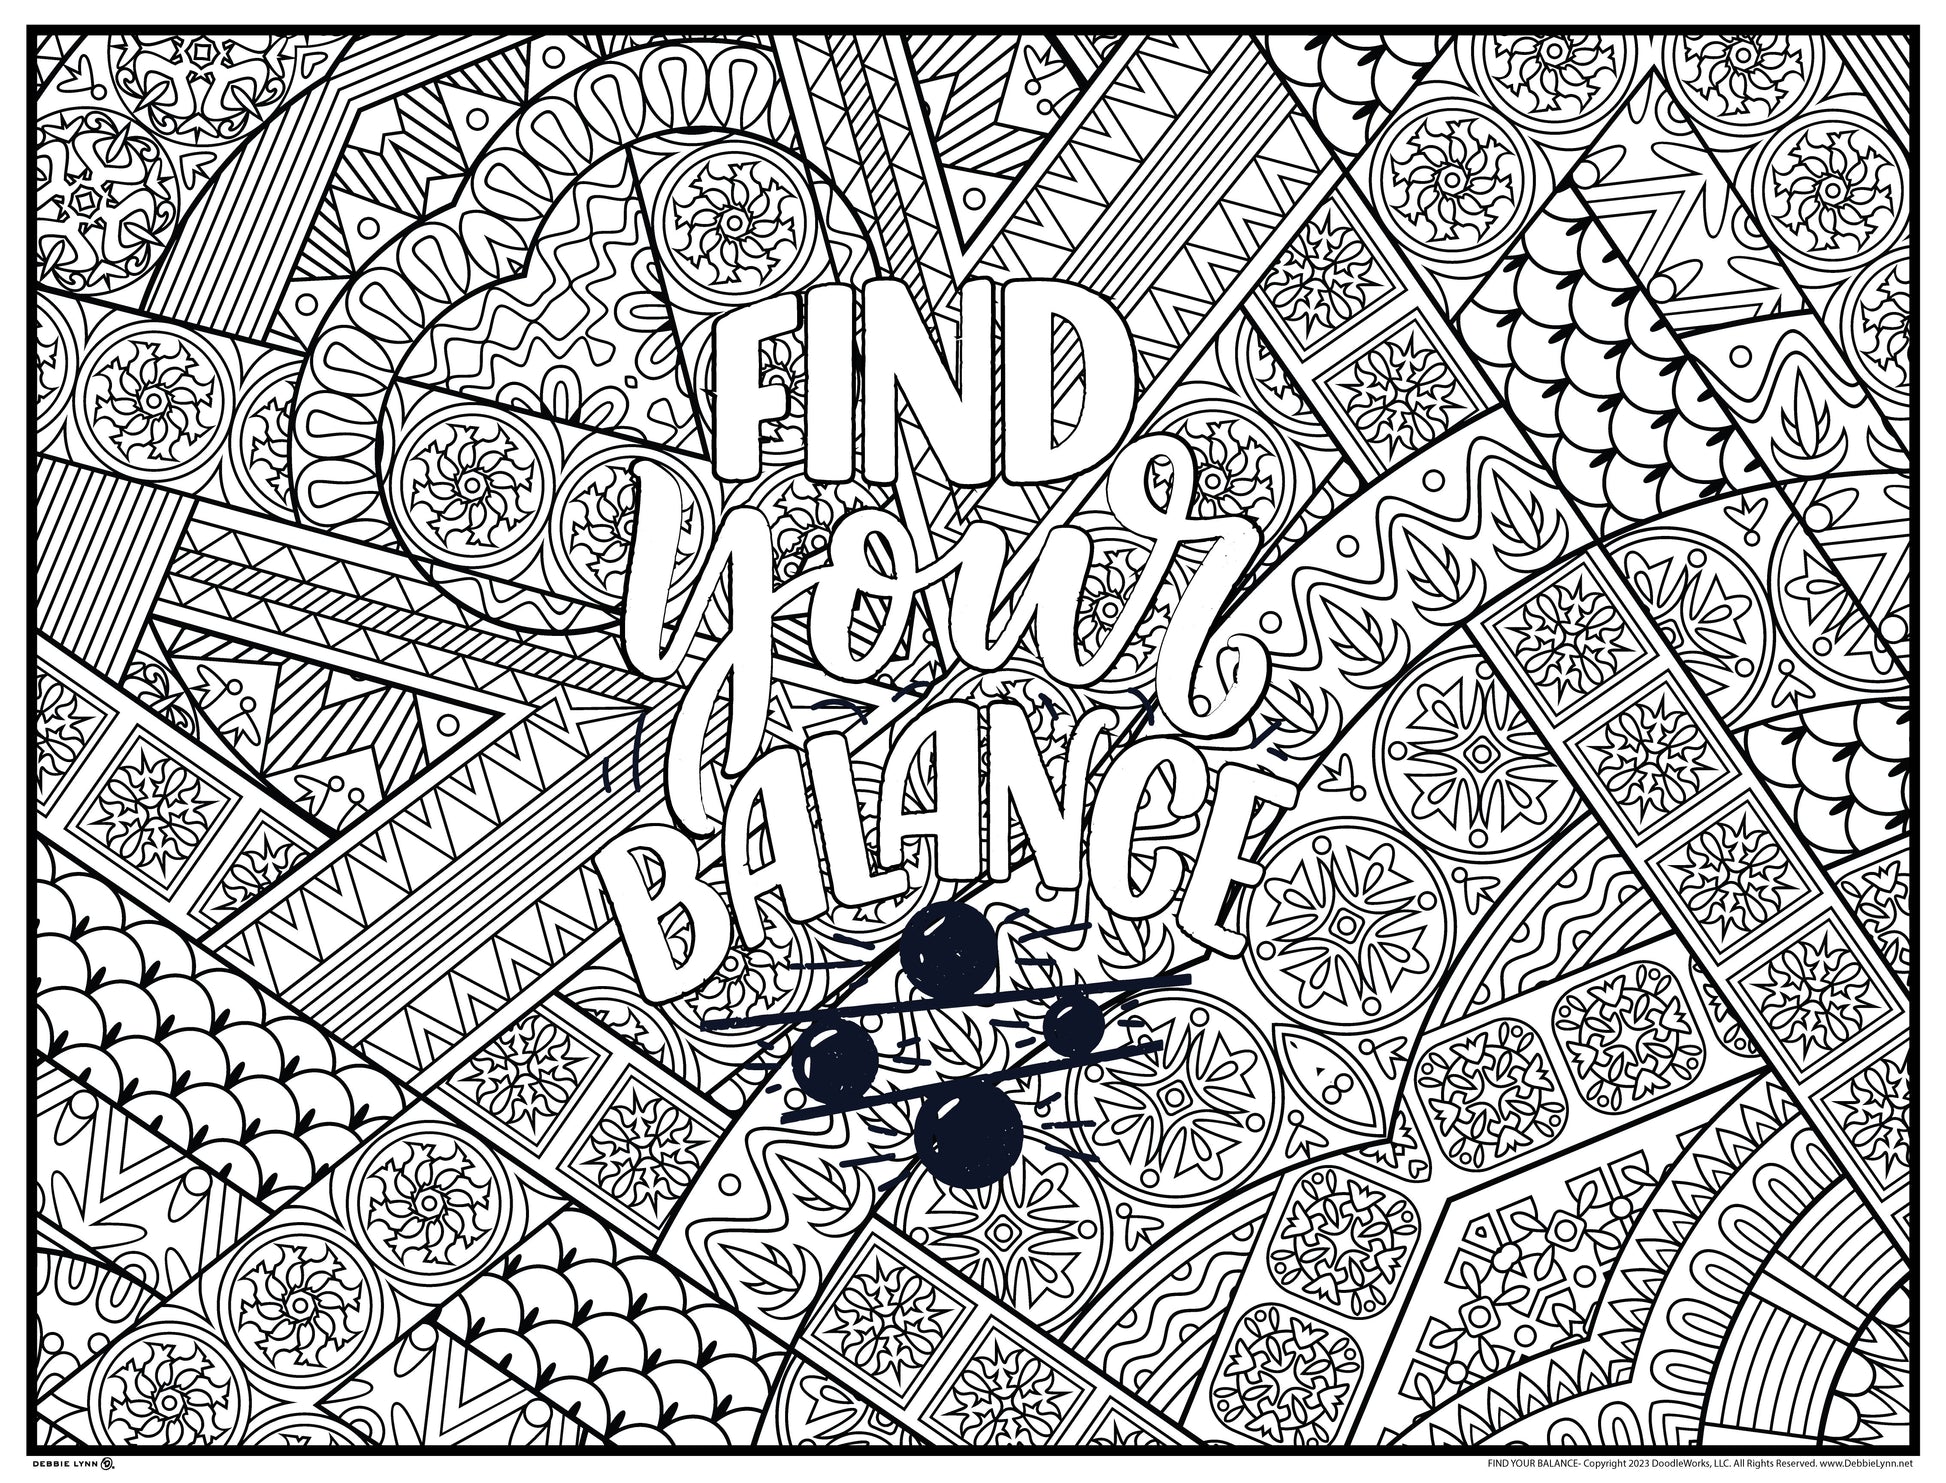 Find your balance giant coloring poster â debbie lynn